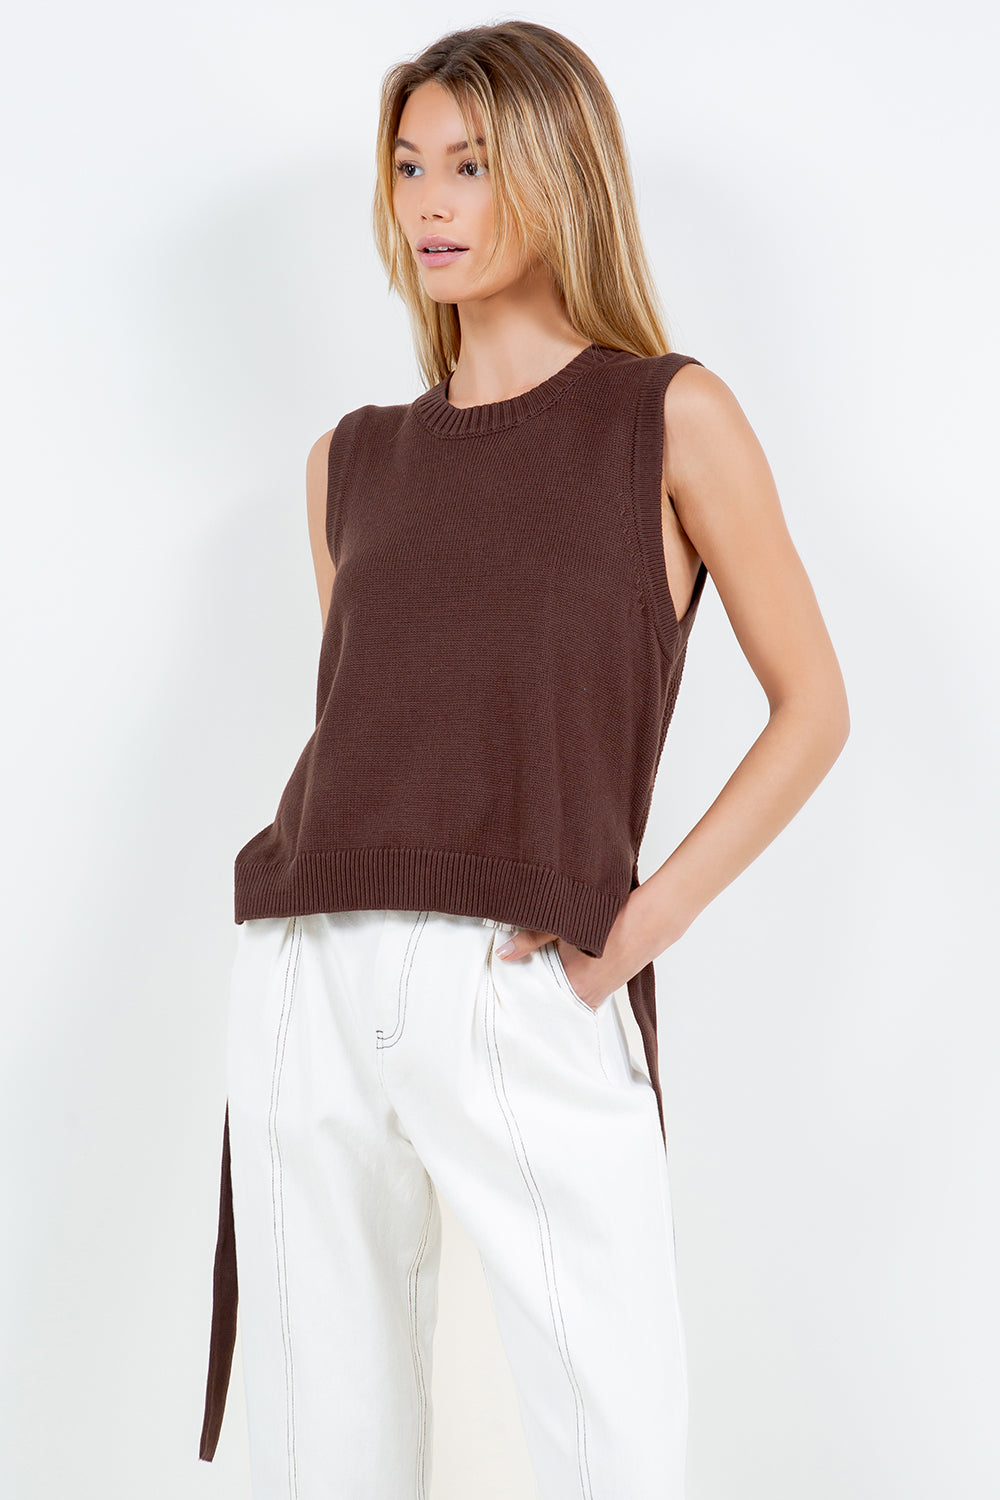 KNIT TOP WITH TIE DETAIL